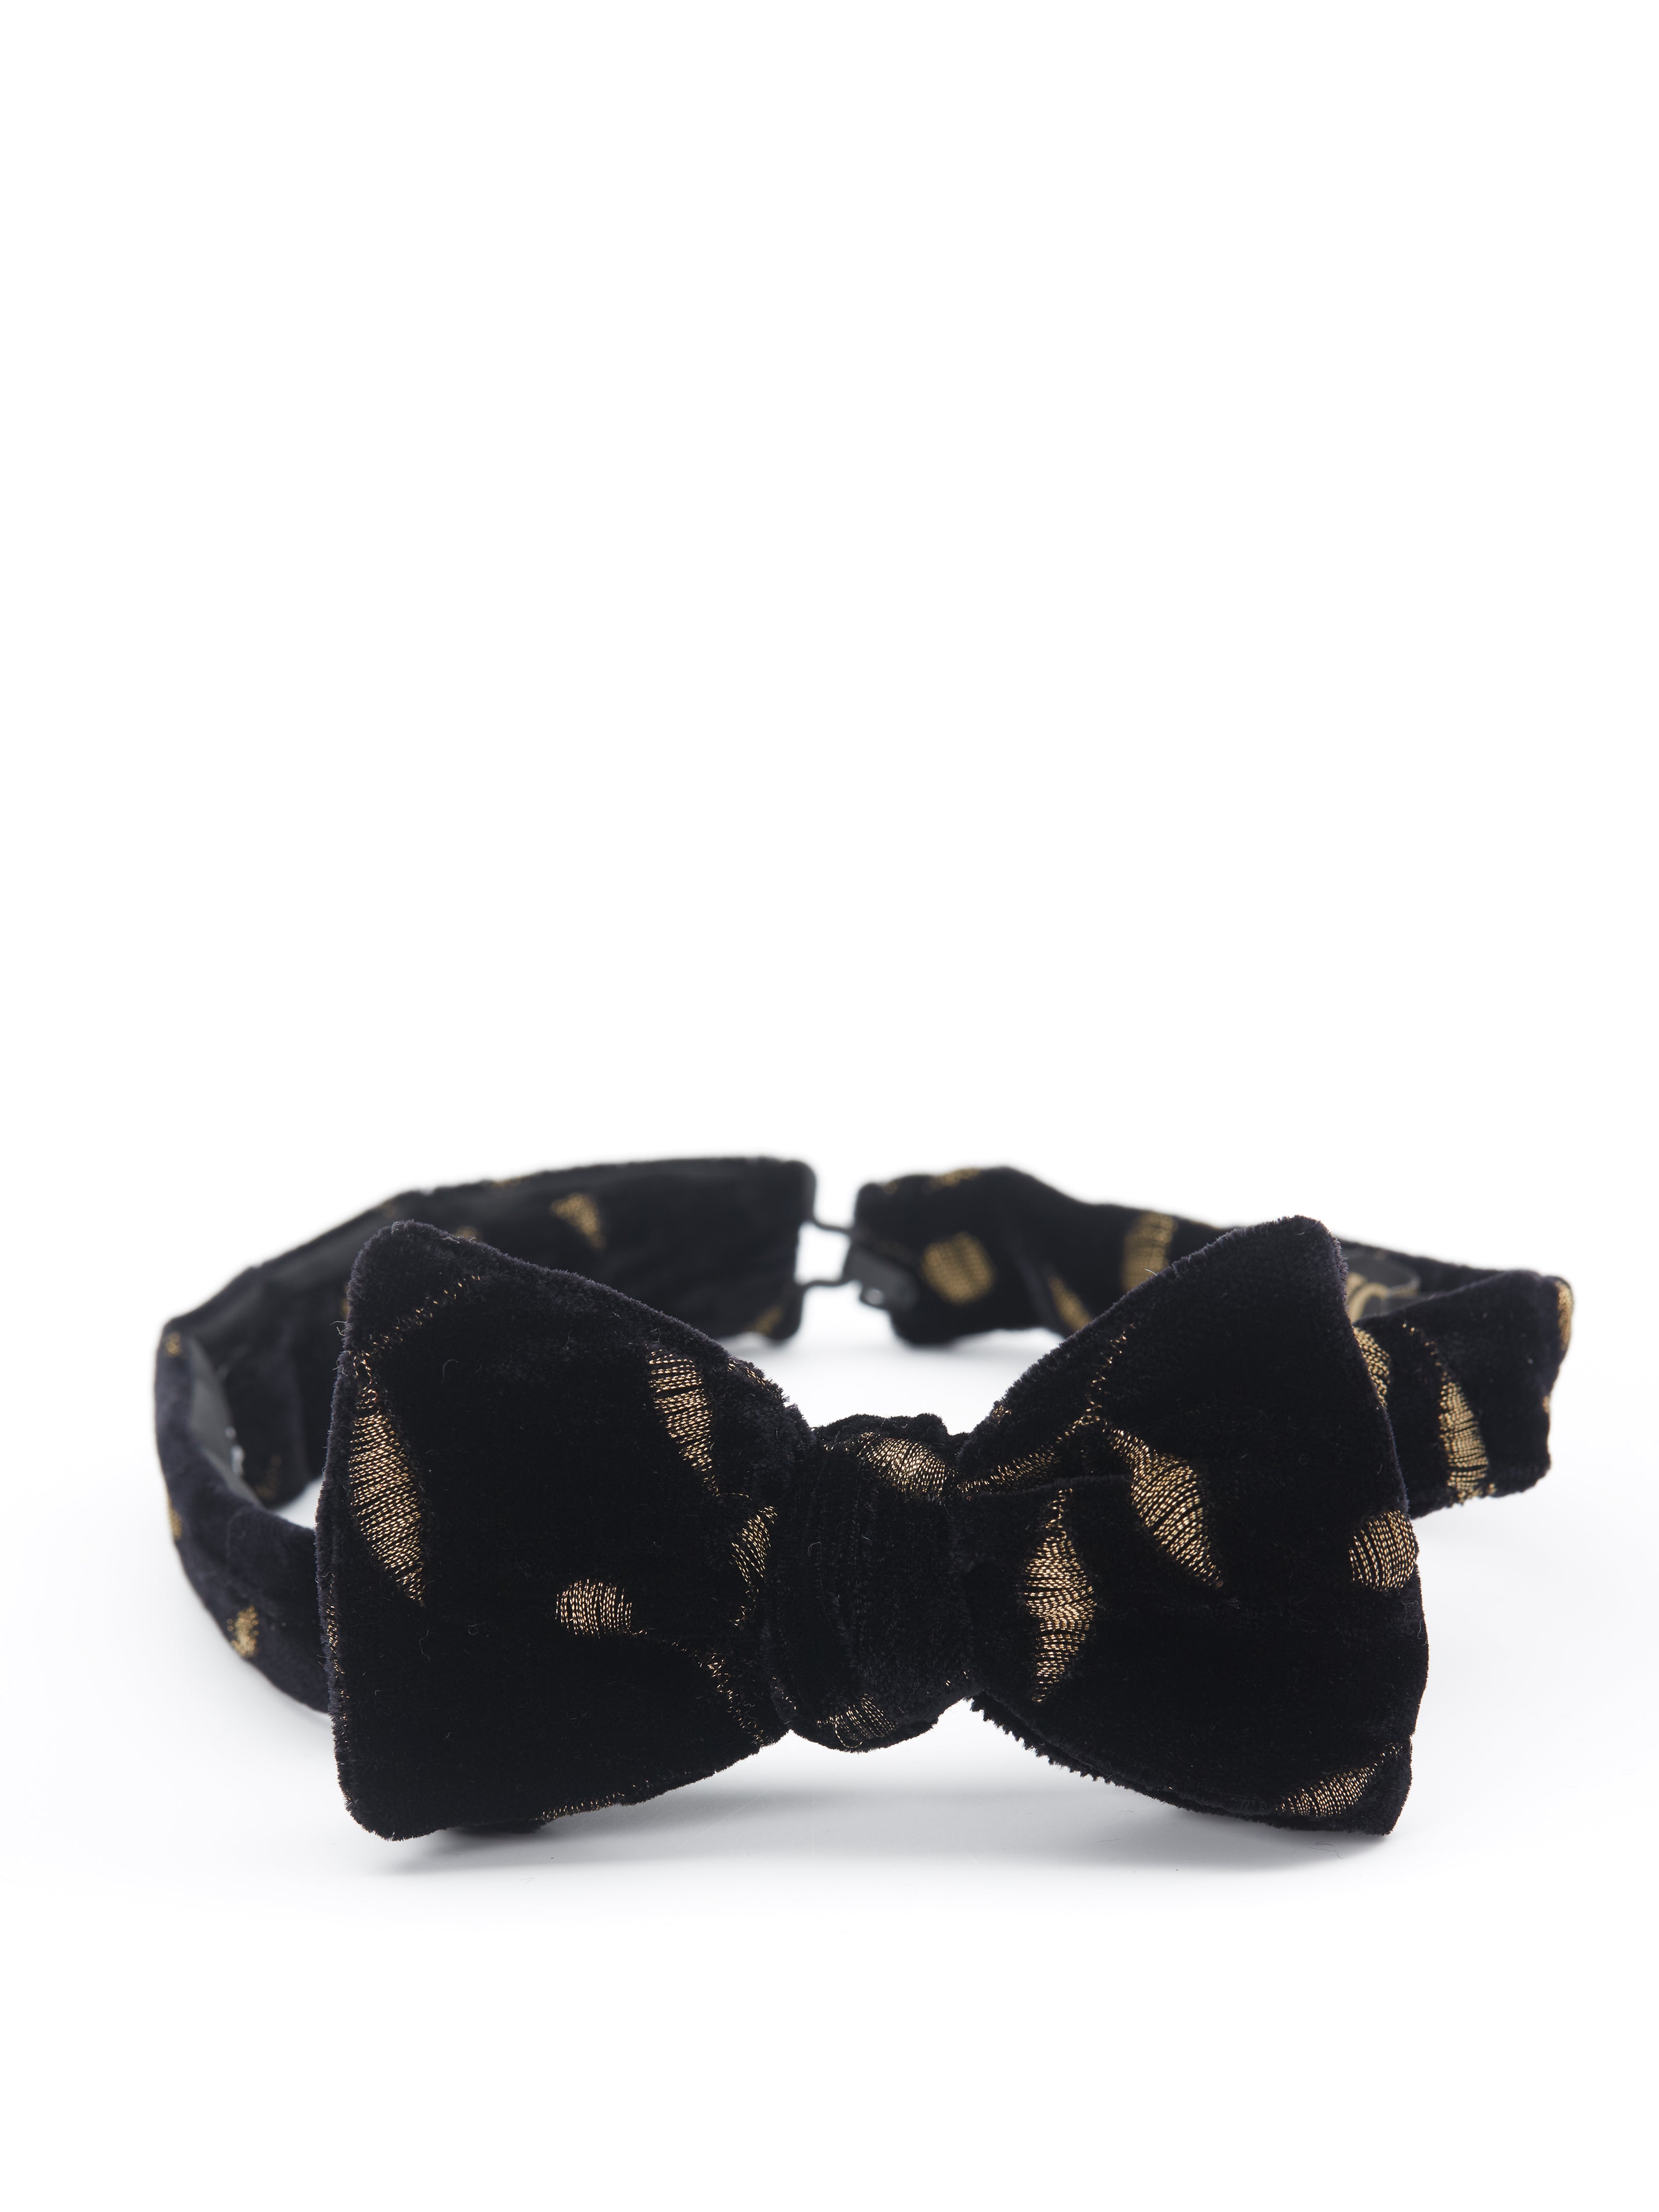 Black Lurex Berries Silk/Rayon Large Party Bow Tie